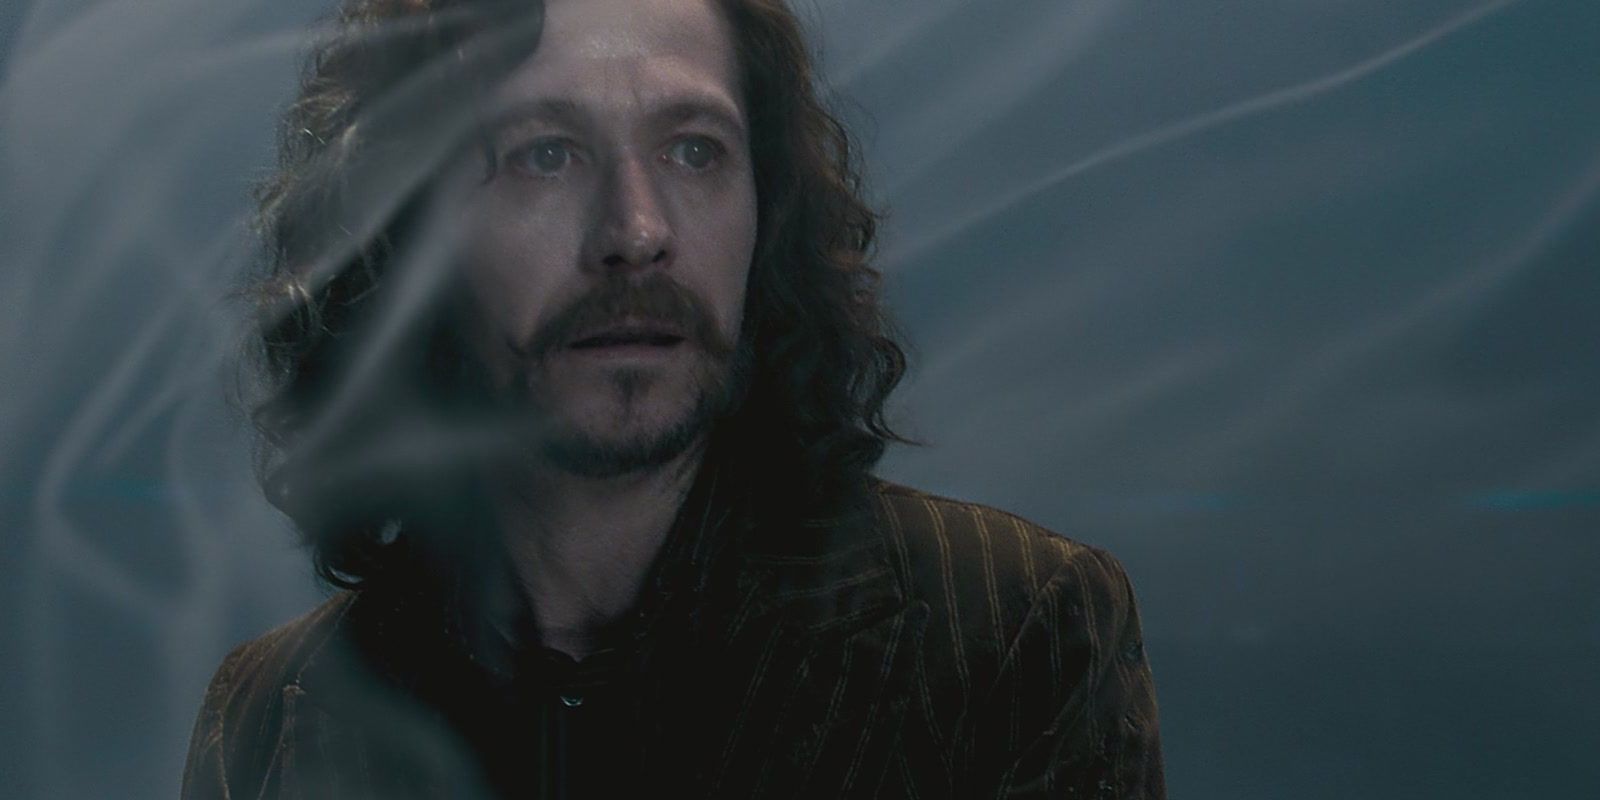 Death of Sirius Black in Harry Potter